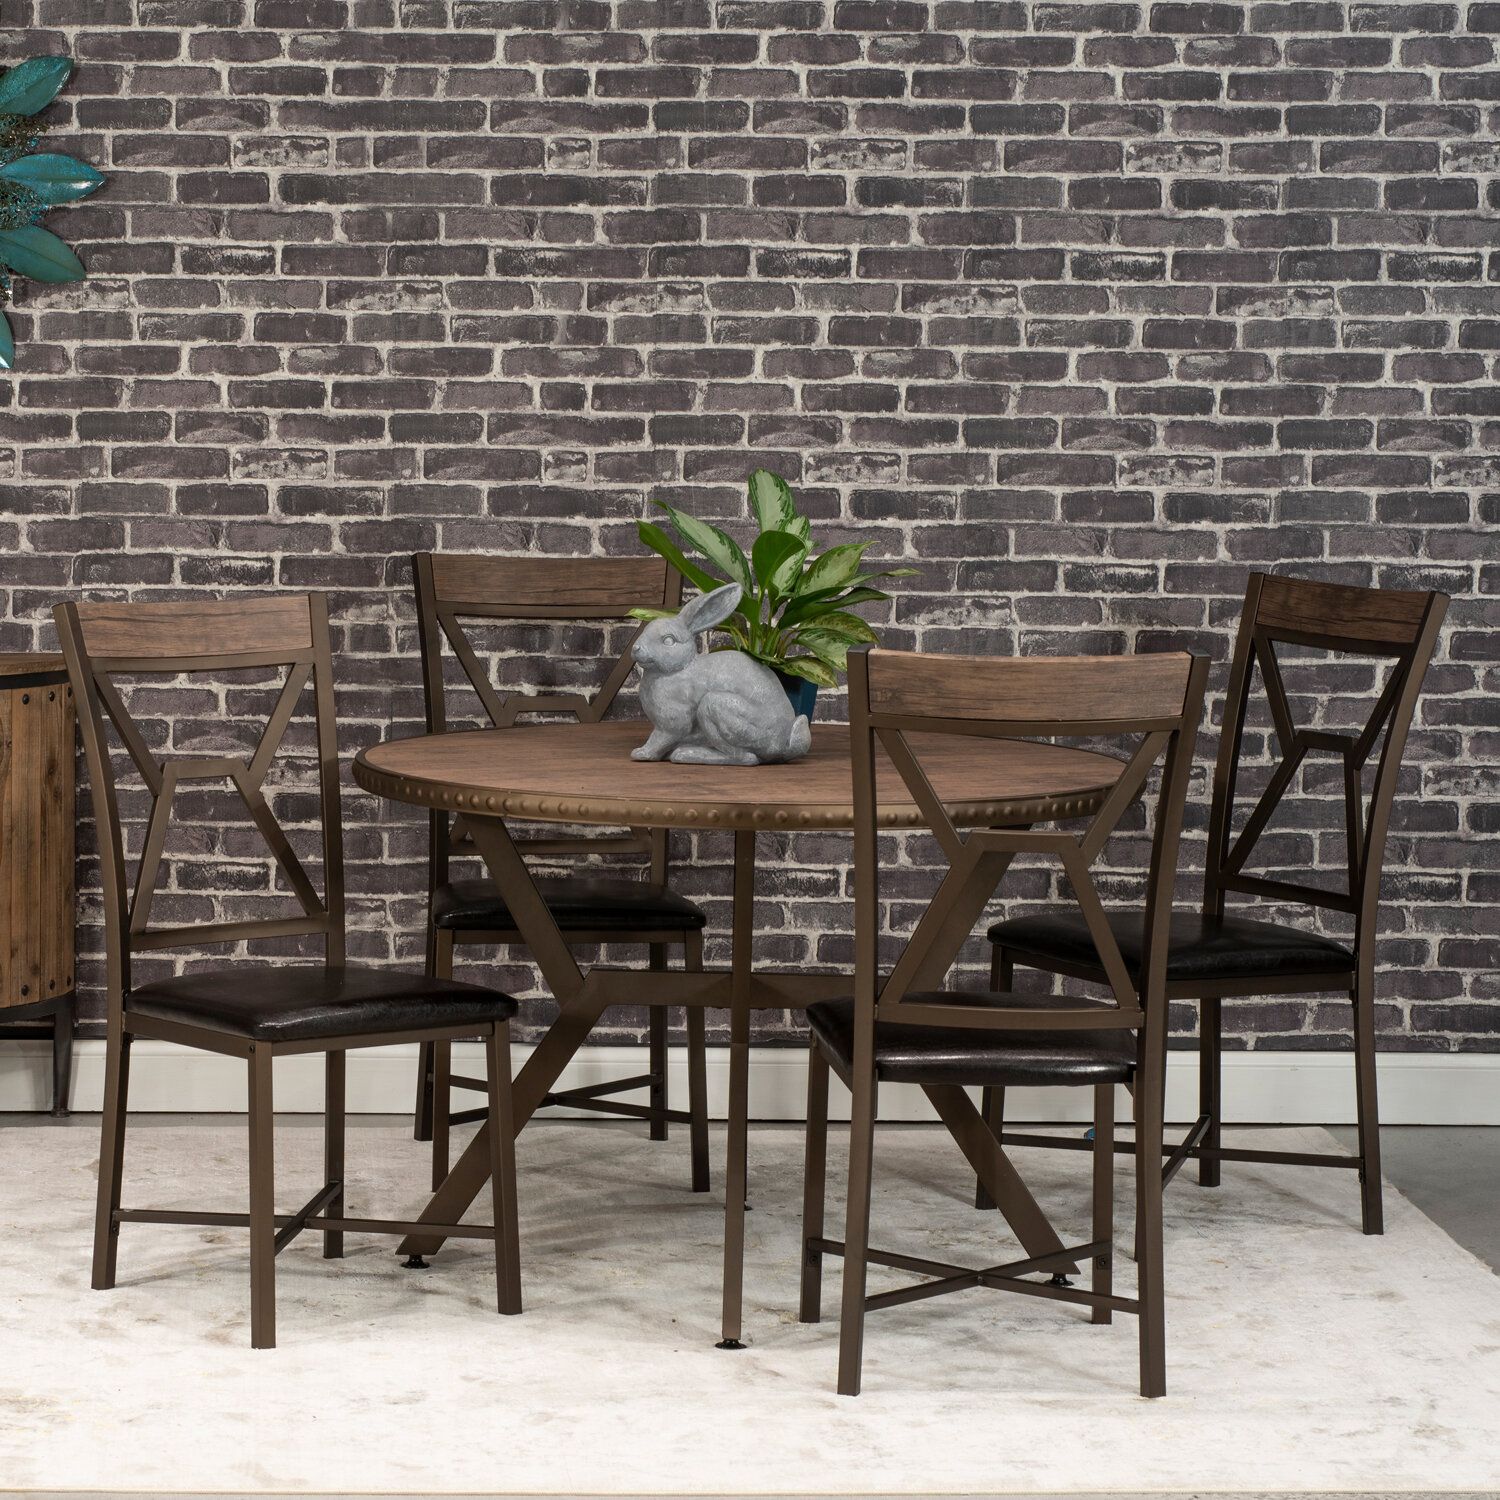 Wayfair For Latest Emmeline 5 Piece Breakfast Nook Dining Sets (View 5 of 20)